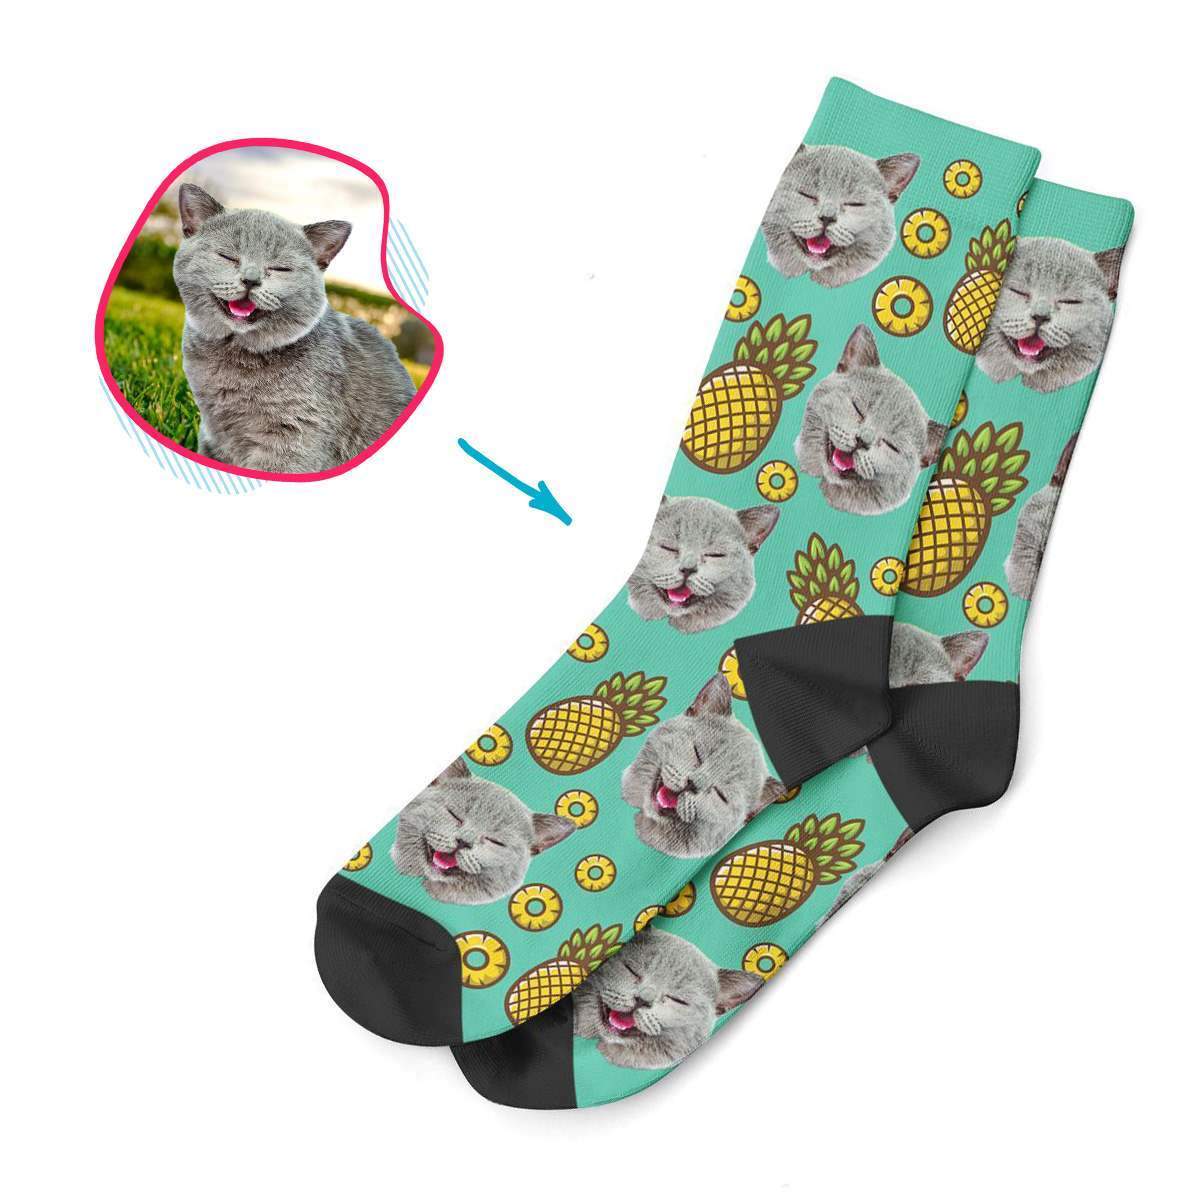 mint Fruits socks personalized with photo of face printed on them